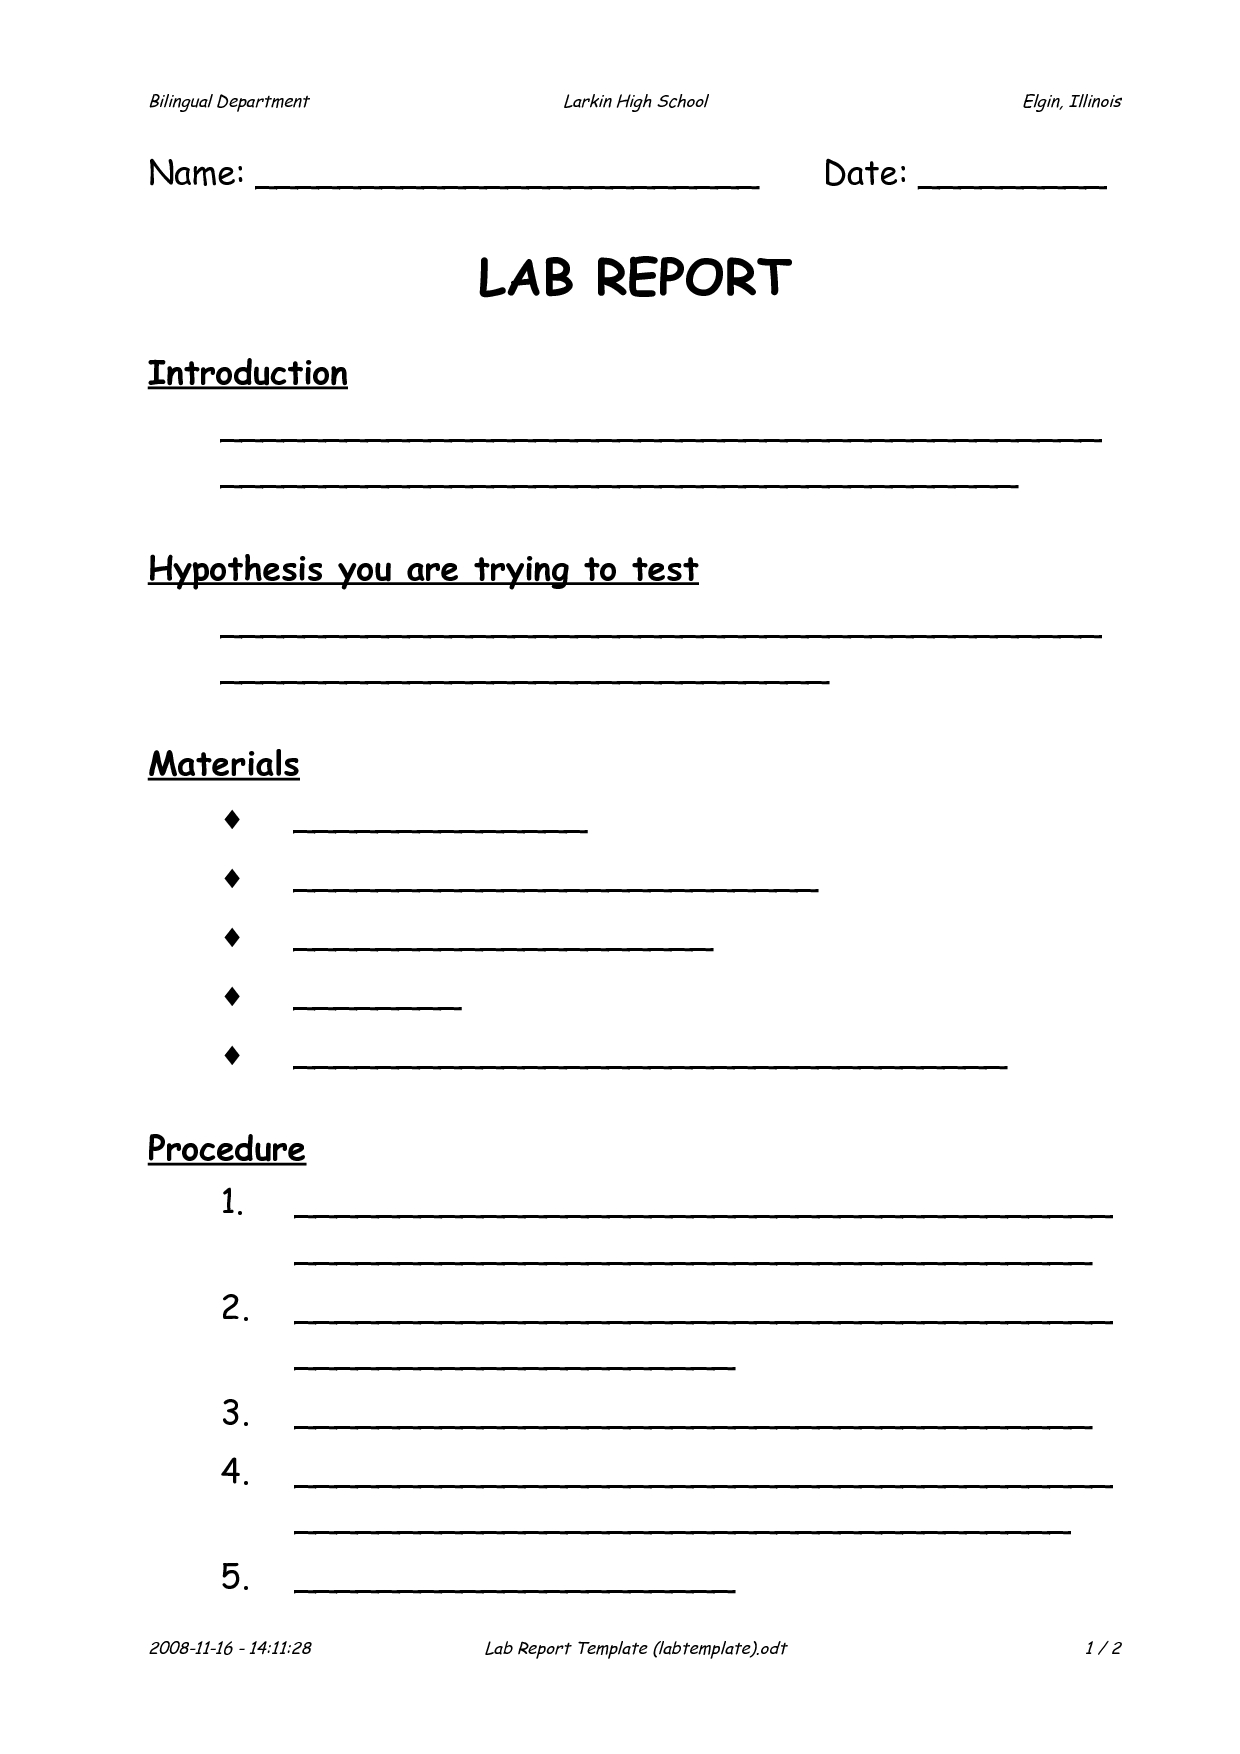 Lab Report Template Pdfnvh41087 7Glt4Bds | Lab Report In Lab Report Template Middle School